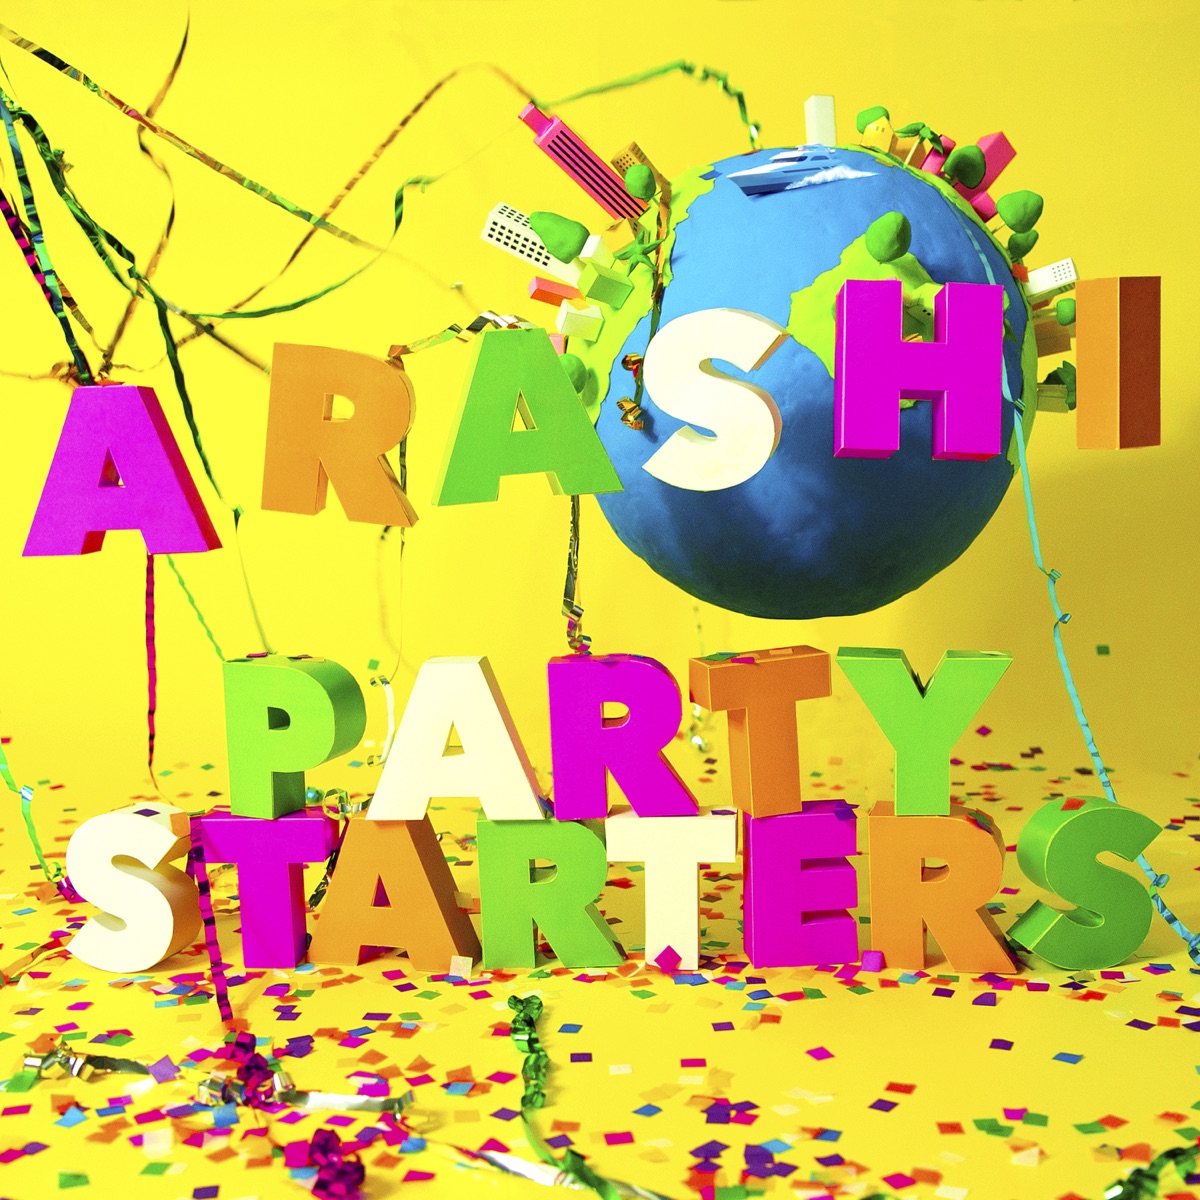 Cover art for『ARASHI - Party Starters』from the release『Party Starters